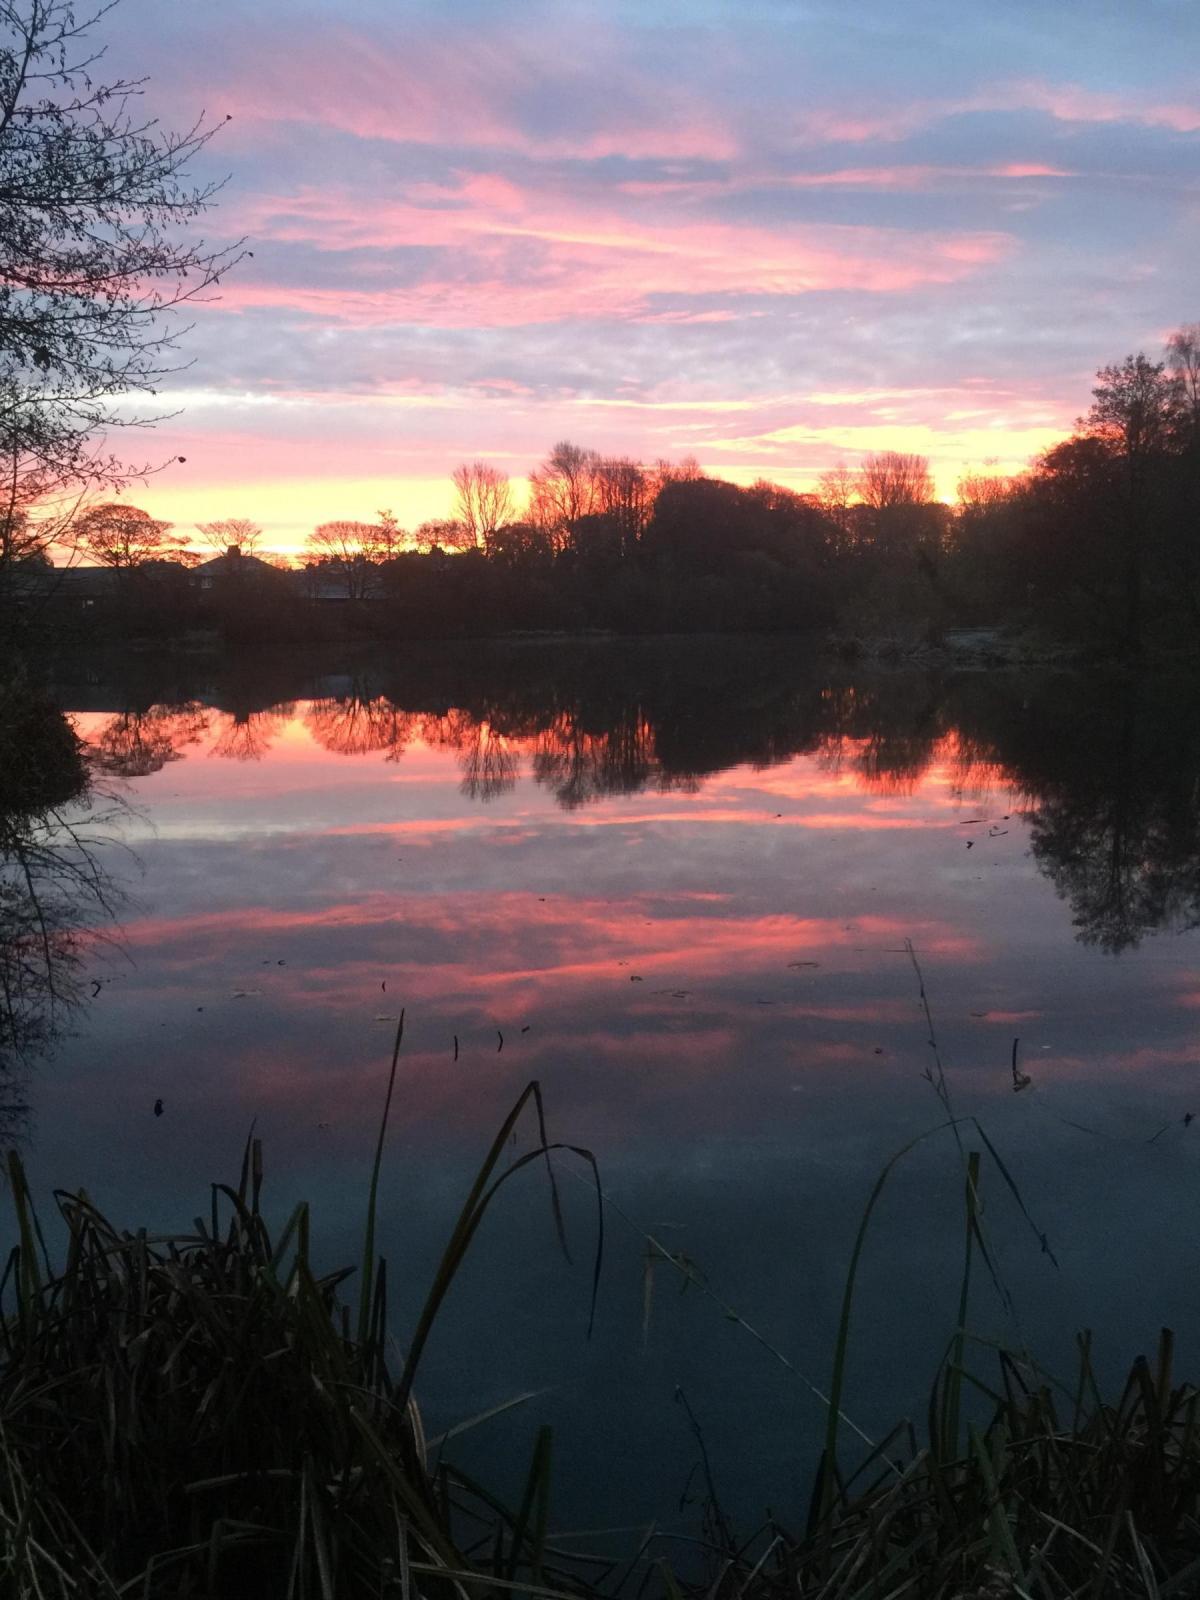 This lovely picture was taken by Star reader Ian Brownlow at the Leg O'Mutton Dam in Eccleston,